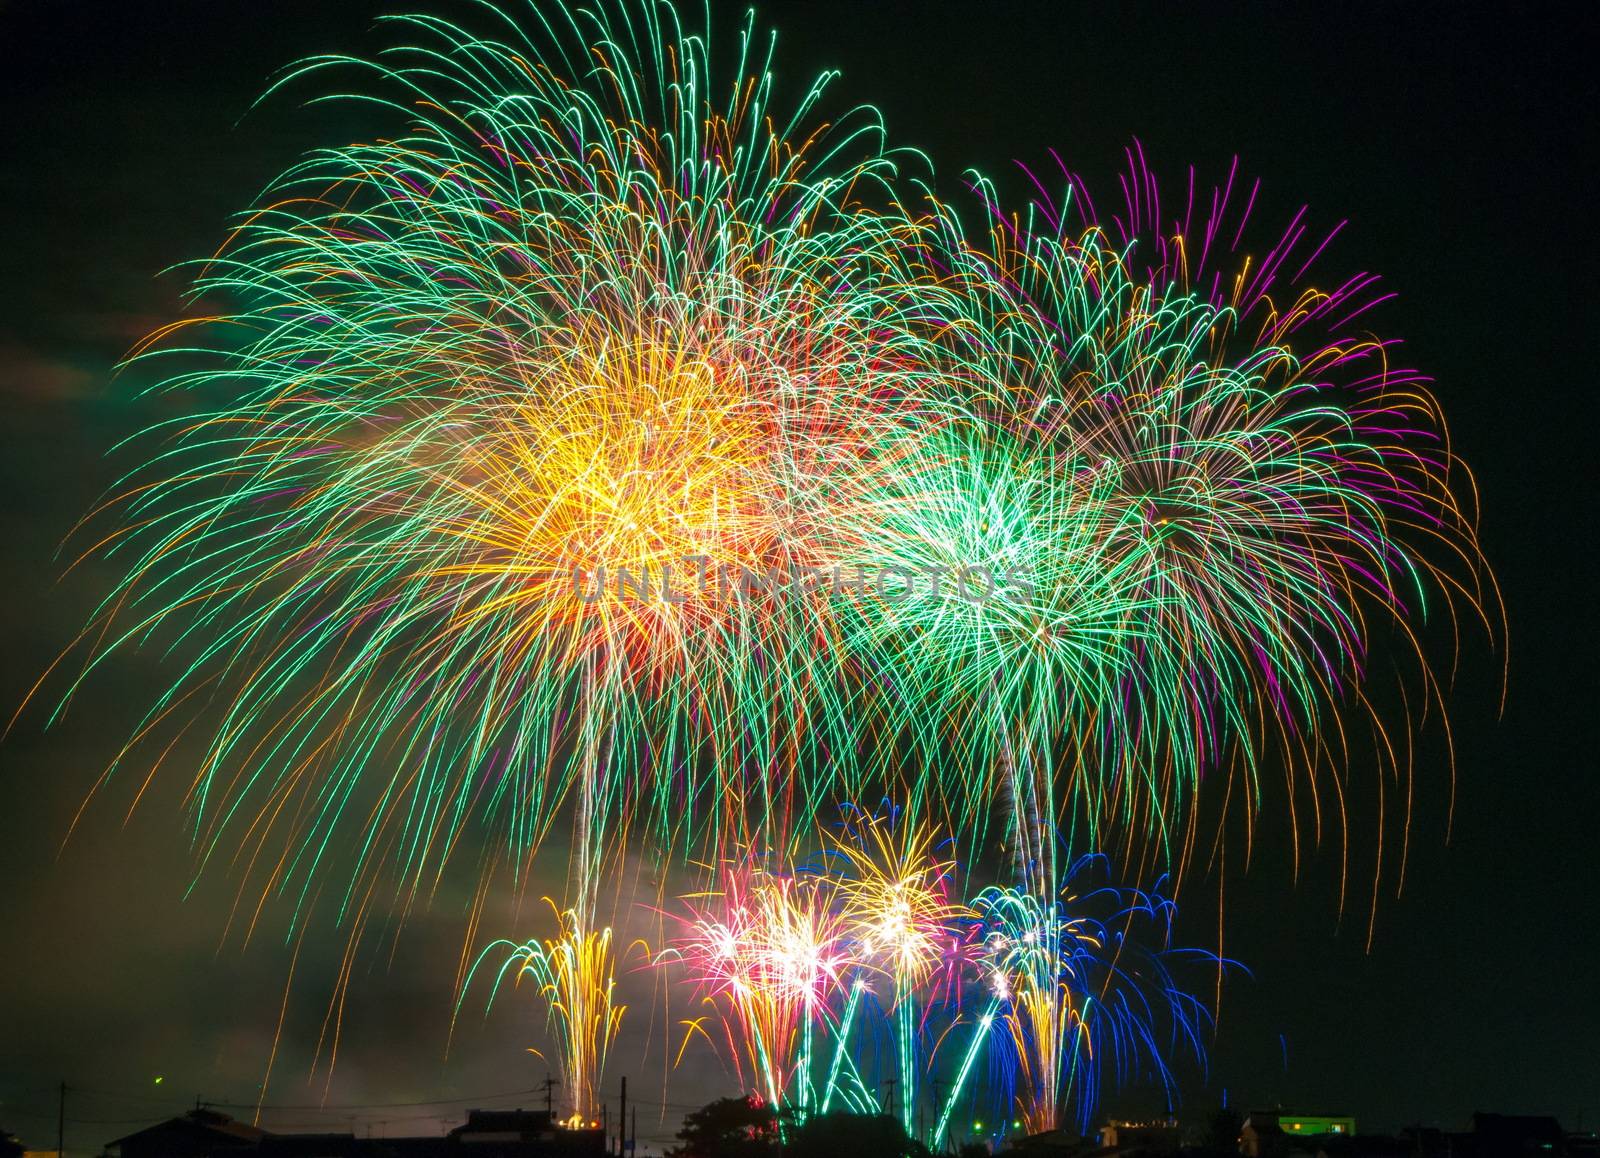 Colorful fireworks. Fireworks are a class of explosive pyrotechnic devices used for aesthetic and entertainment purposes. Visible noise due to low light, soft focus, shallow DOF, slight motion blur by Roman1030